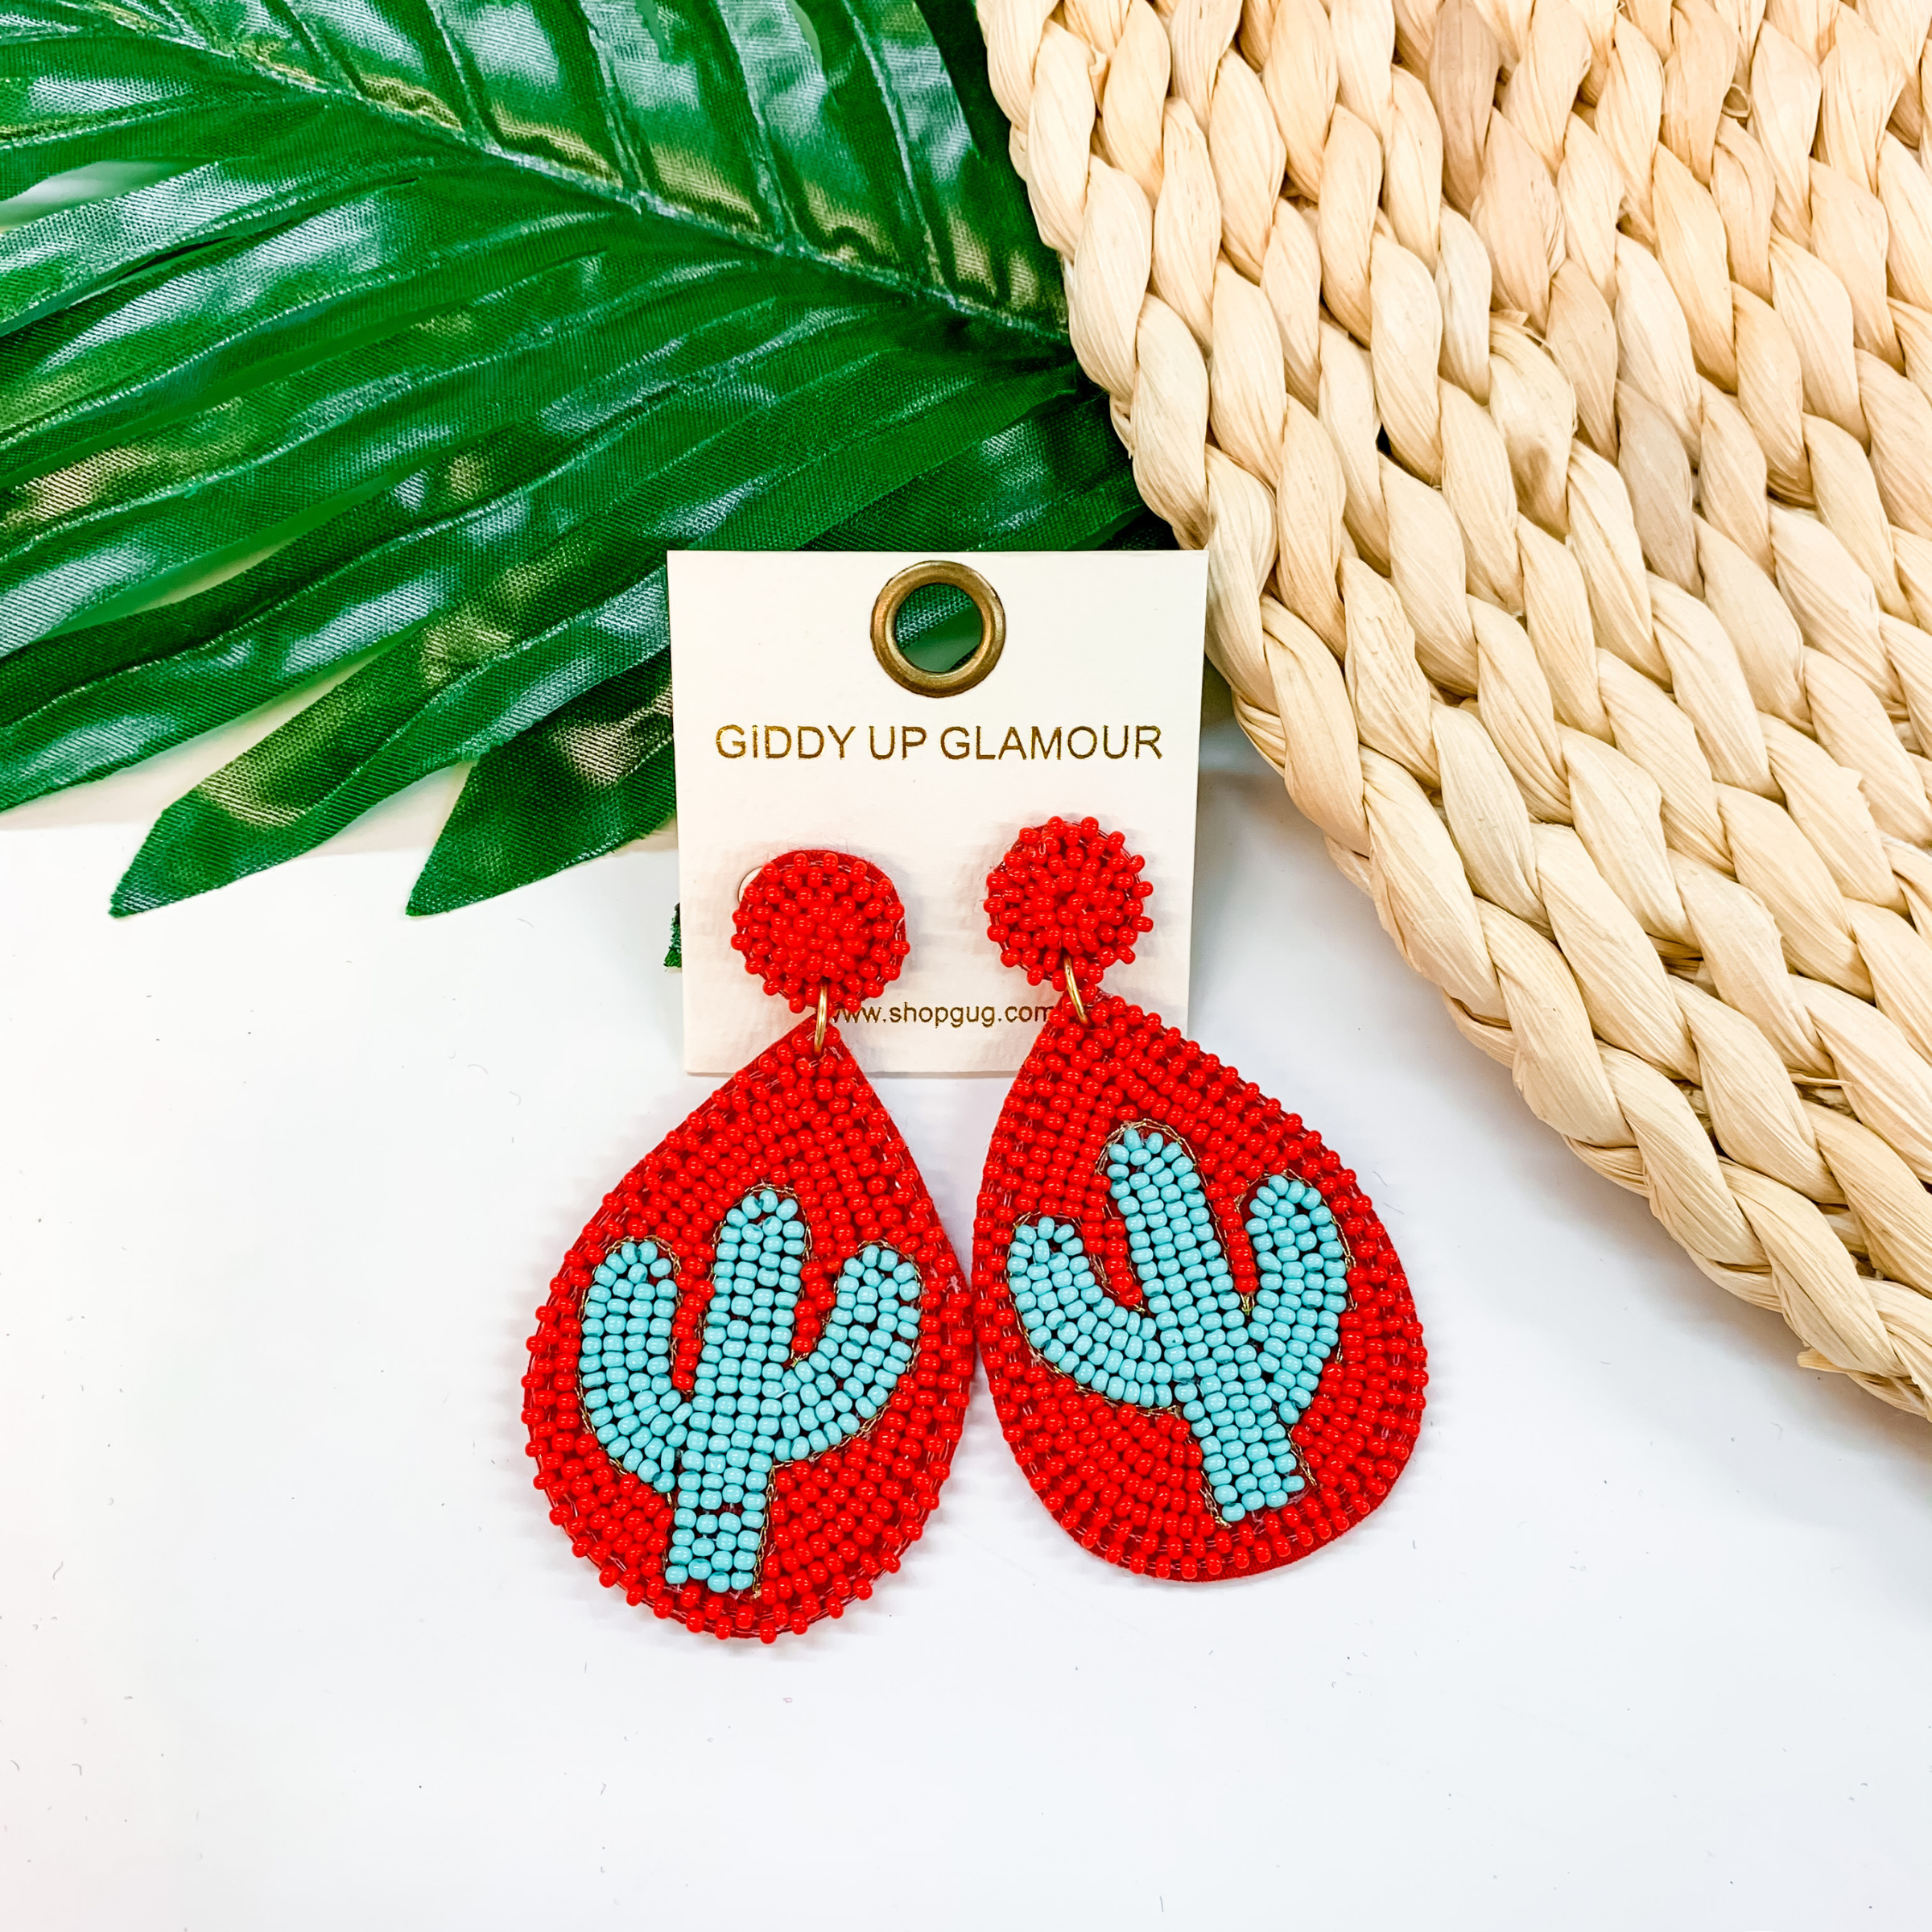 Lookin' Sharp Seed Bead Cactus Teardrop Earrings In Red and Turquoise - Giddy Up Glamour Boutique